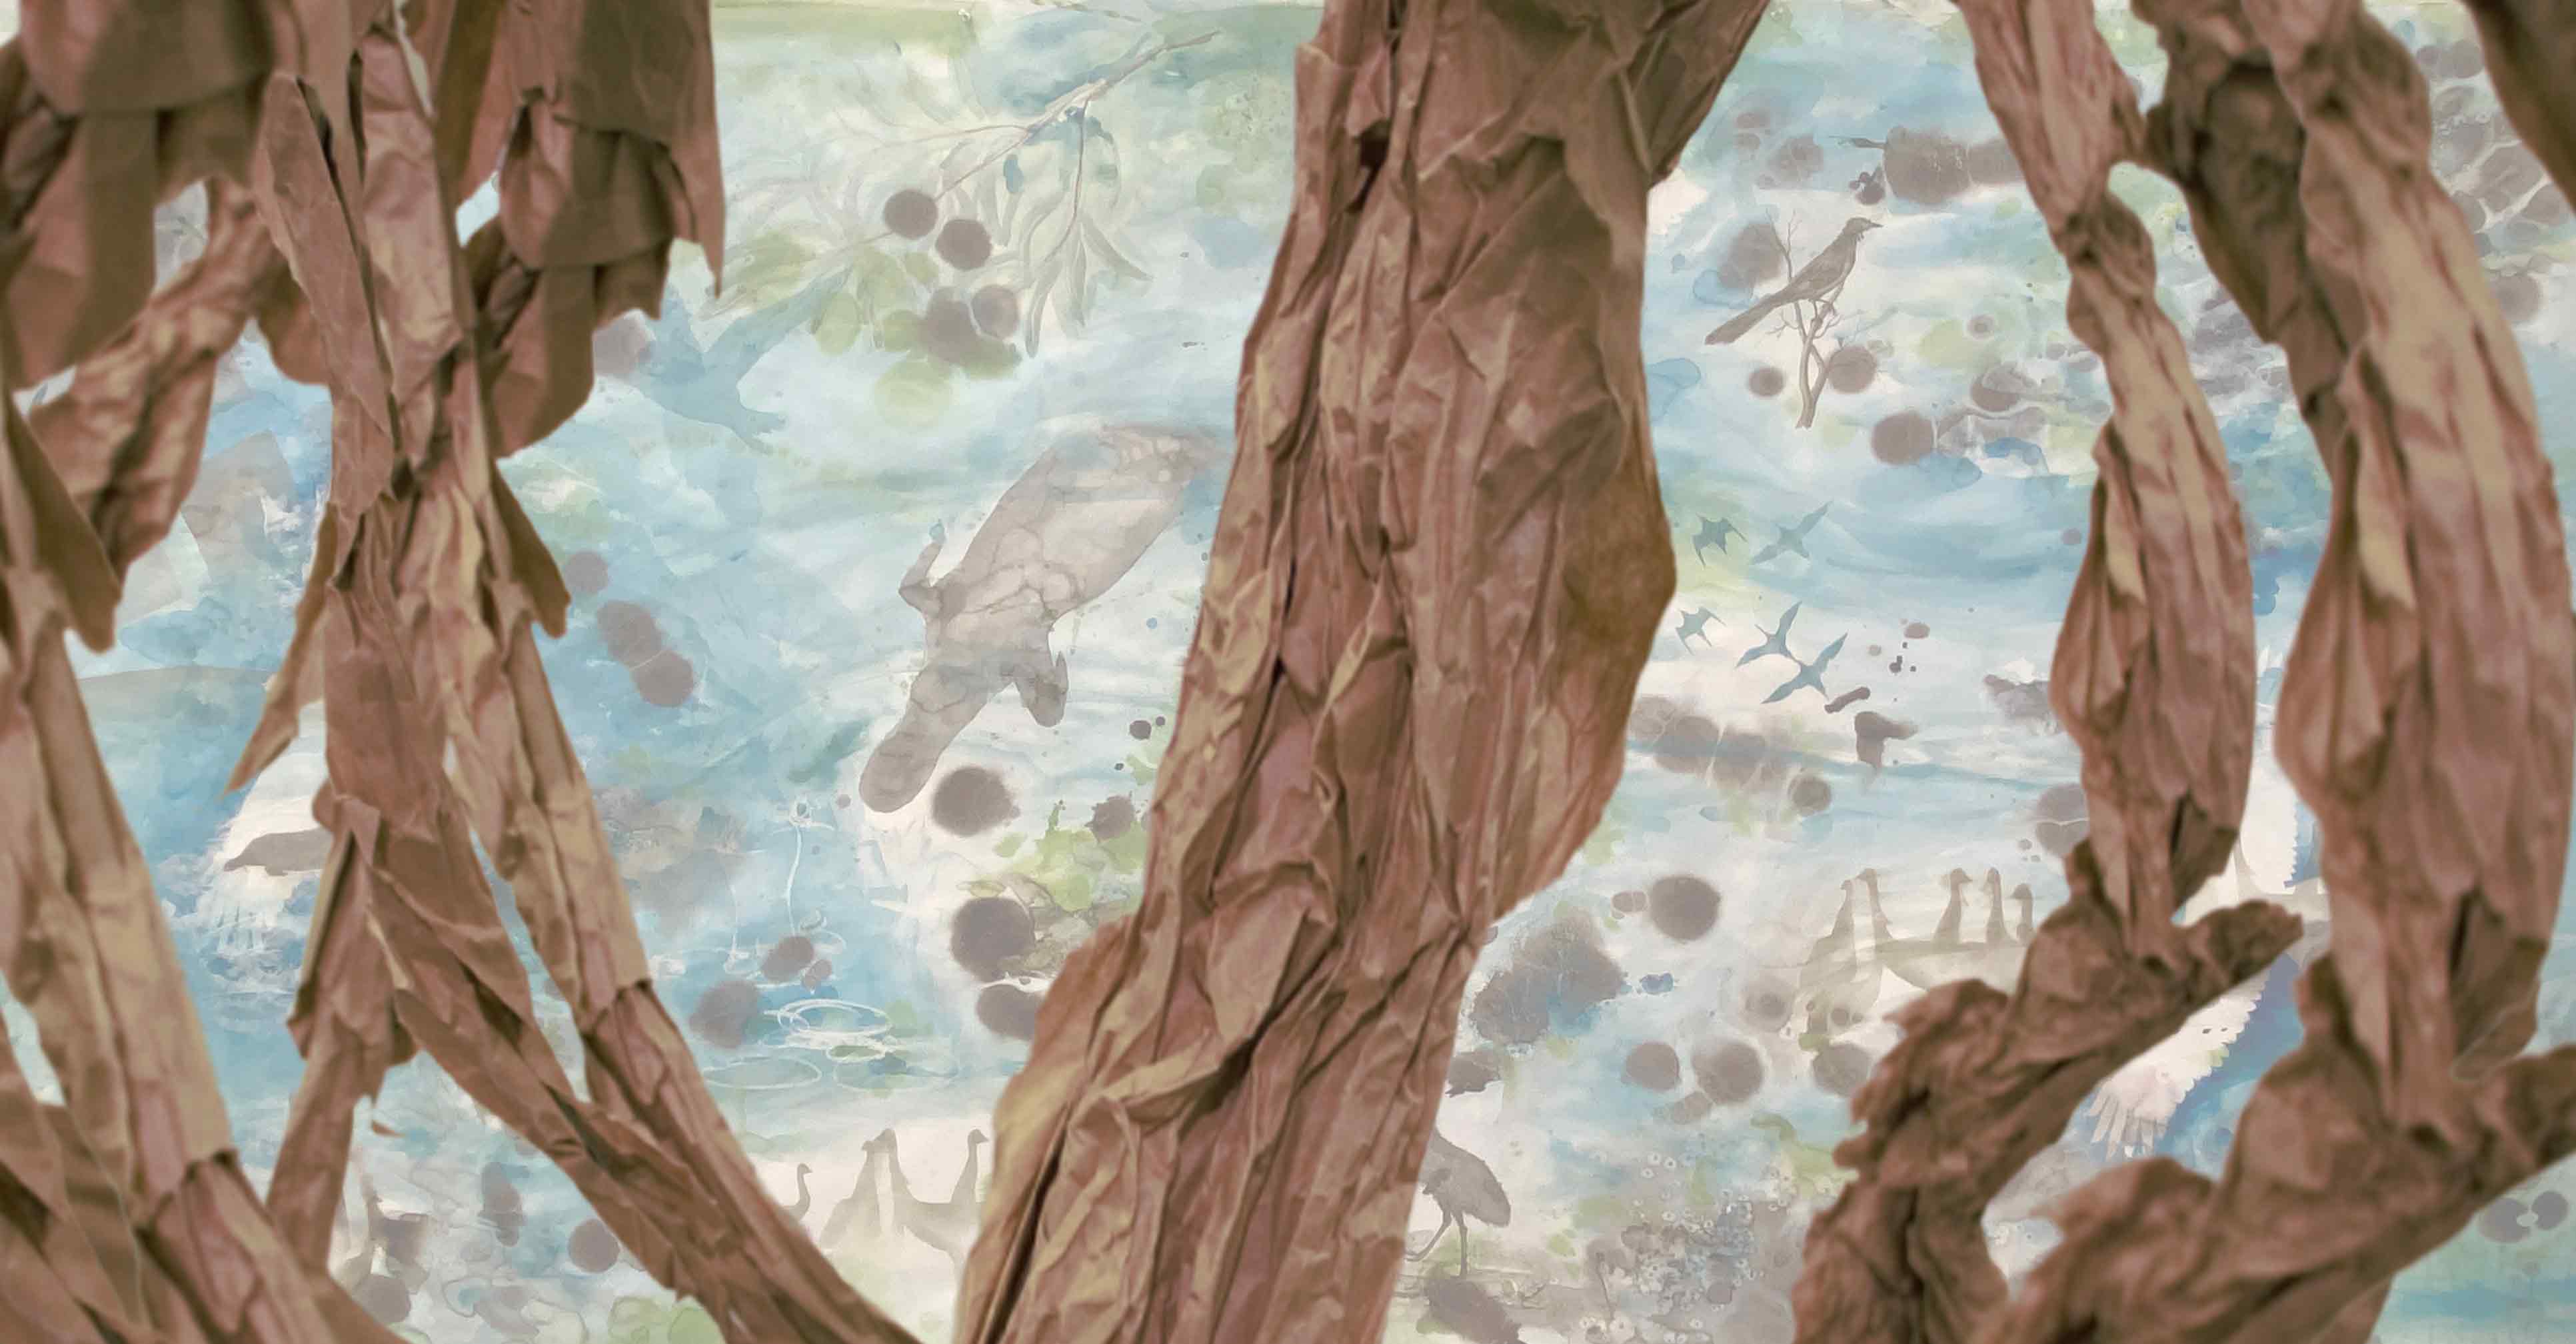 Scrunched up pieces of paper form what looks like tree roots that are scattered across the foreground of the image while in the background there’s a blue and green wash of watercolour with stones, water plants and a platypus painted on a indistinguishable surface. 